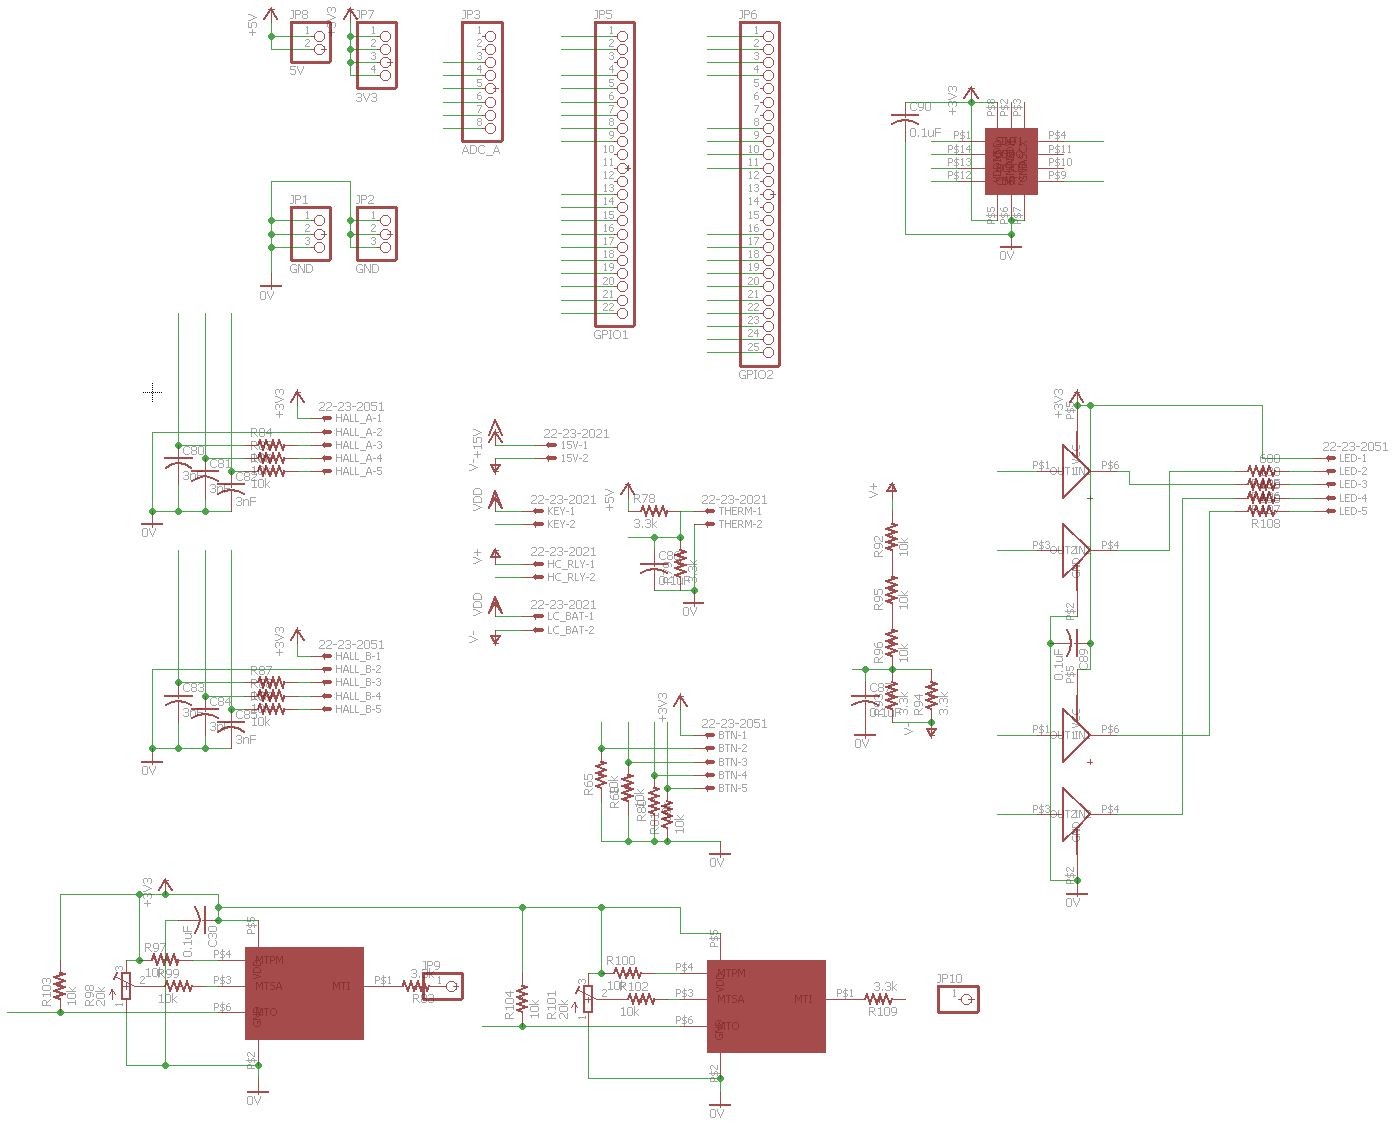 Sensors and connections schematic